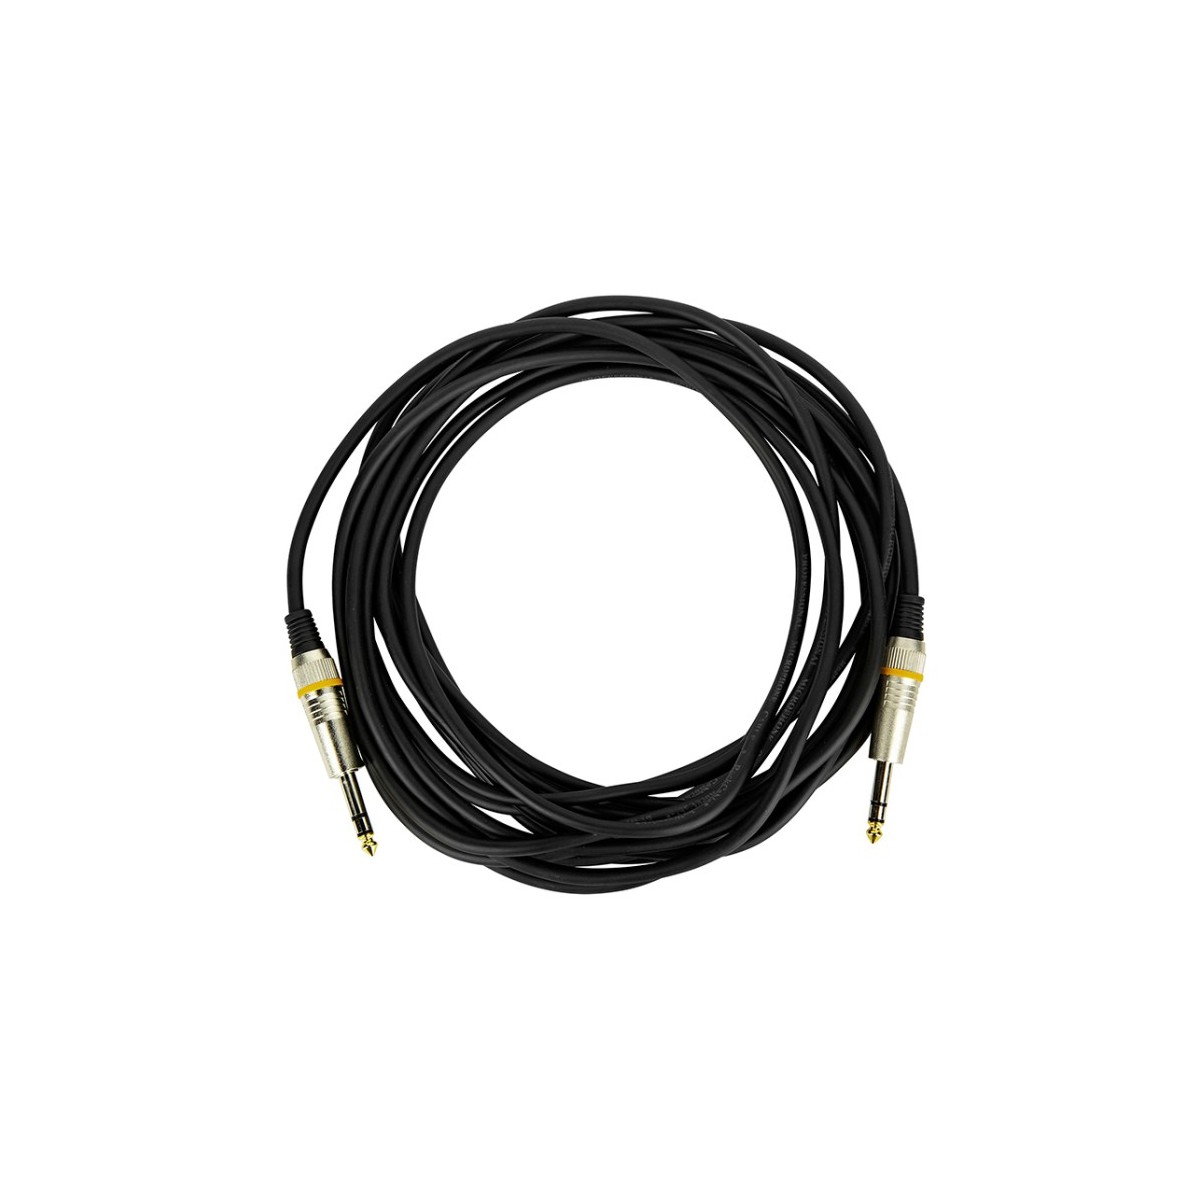 ROCKCABLE STEREO CABLE 6M STRAIGHT